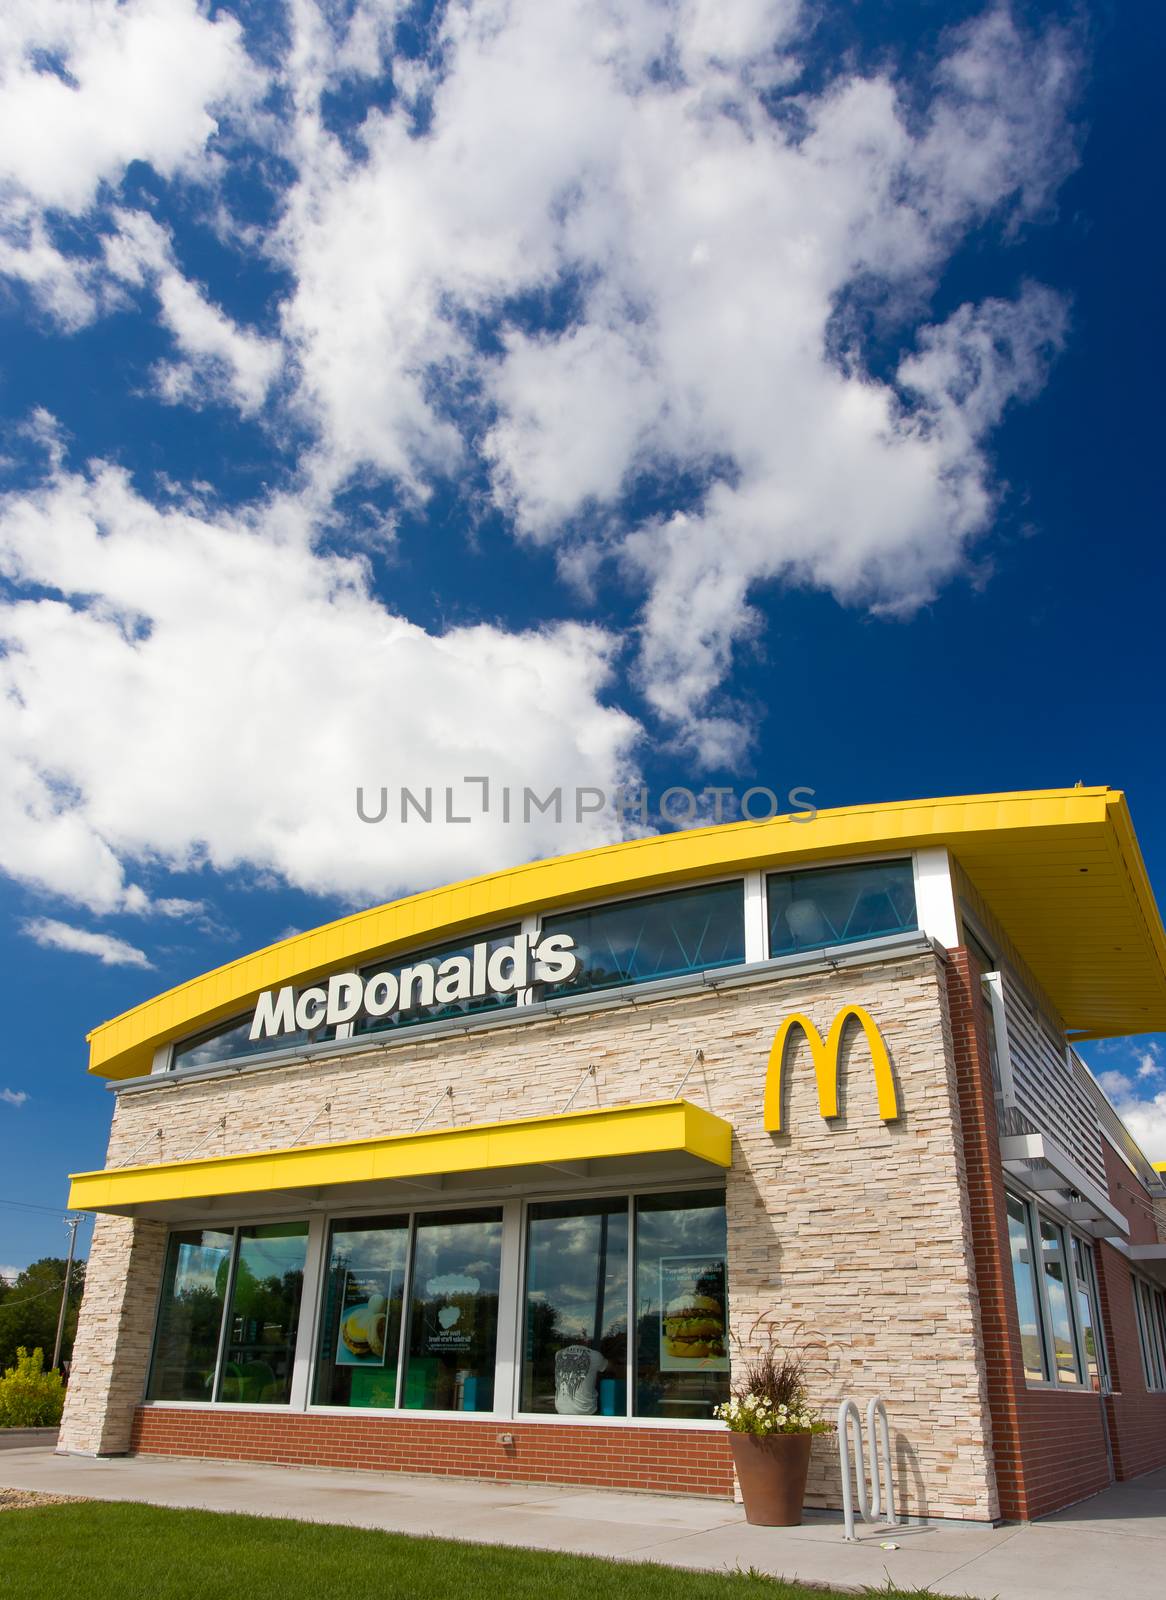 STILLWATER, MN/USA - August 10, 2015: Contemporary McDonald's exterior. The McDonald's Corporation is the world's largest chain of hamburger fast food restaurants.